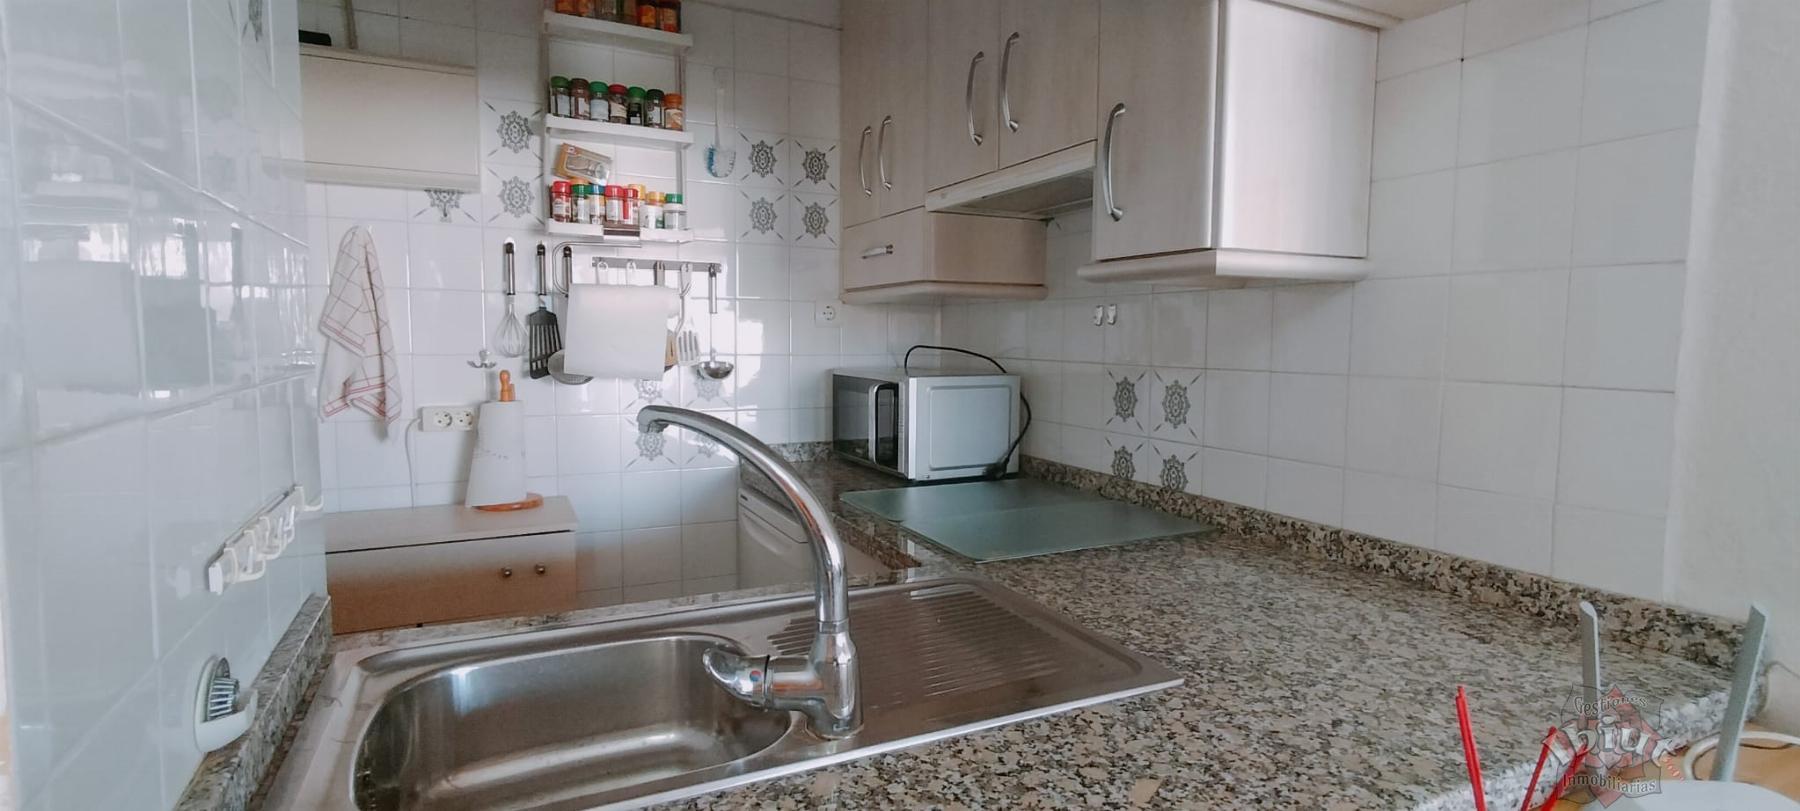 For rent of study in Torrox-Costa